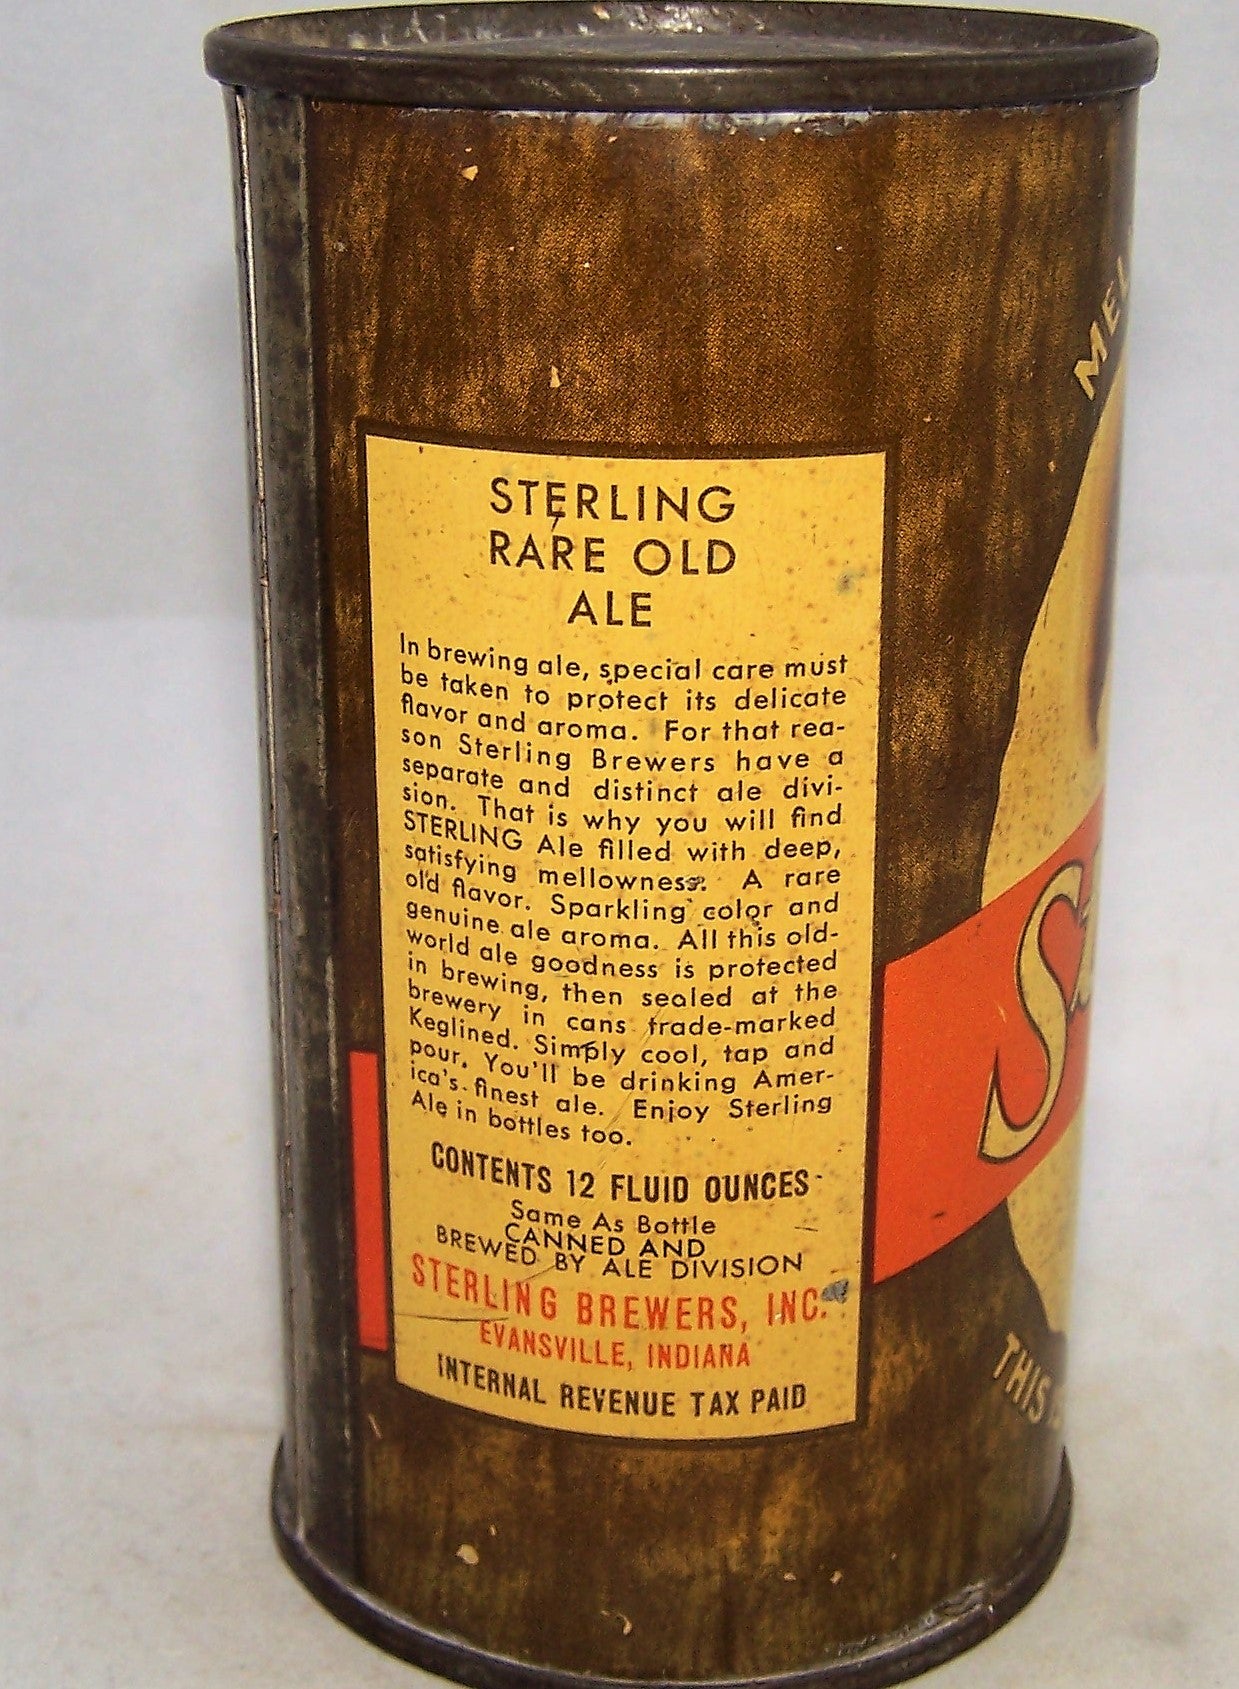 Sterling Ale 'Mellowed By Age" Lilek # 771, USBC 136-28, Grade 1-  Sold on 02/23/19